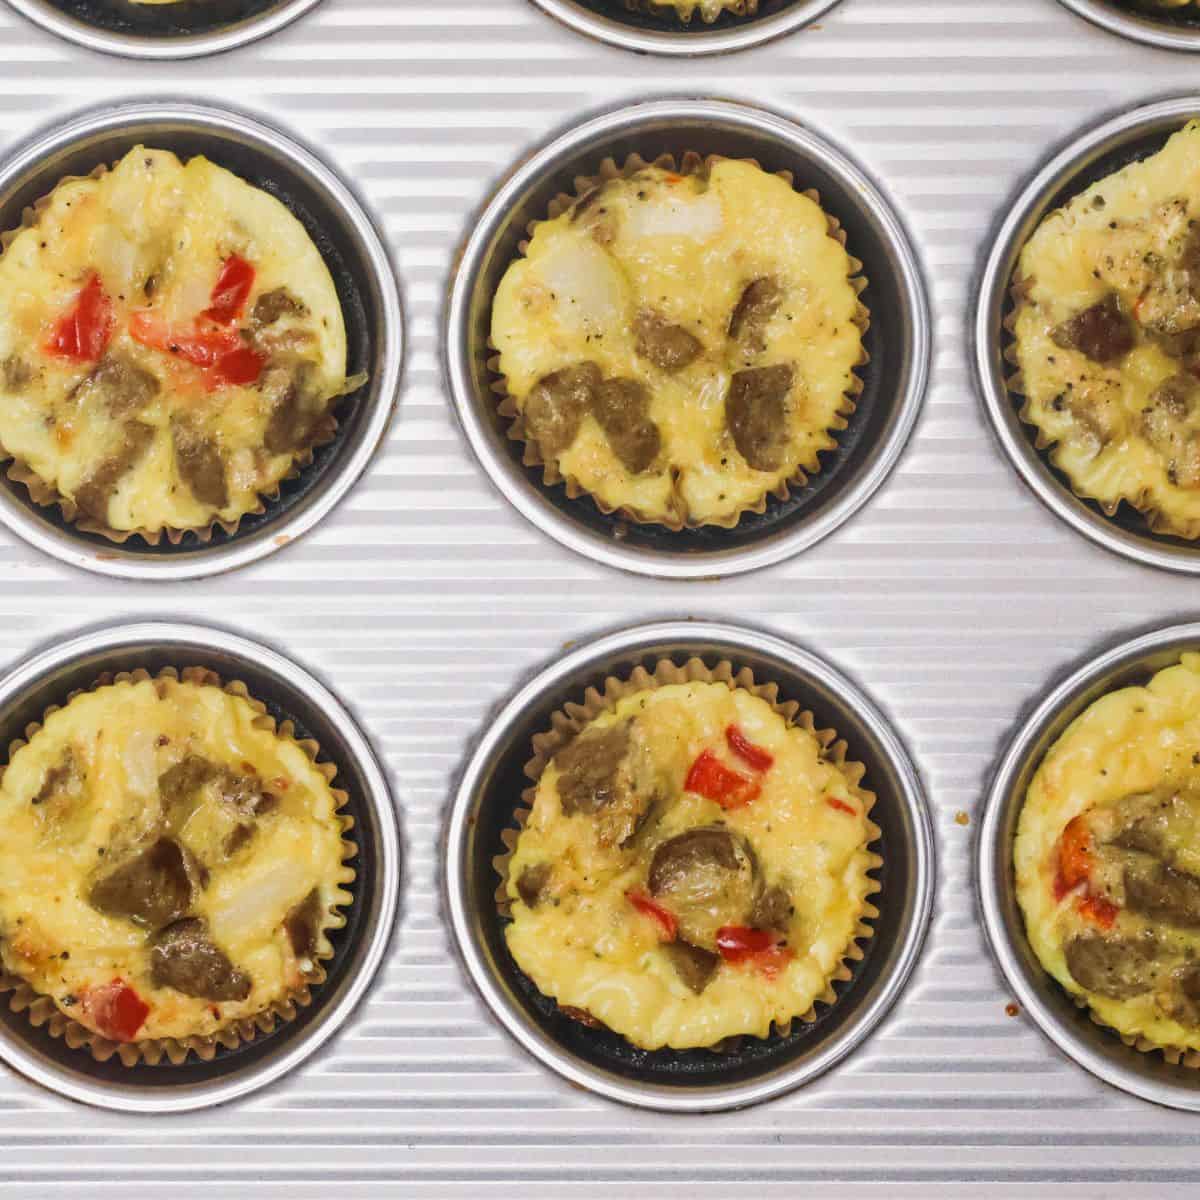 Golden brown keto egg bites fresh out of the oven in a muffin tin, showing the melted cheese and bits of red pepper and turkey sausage.